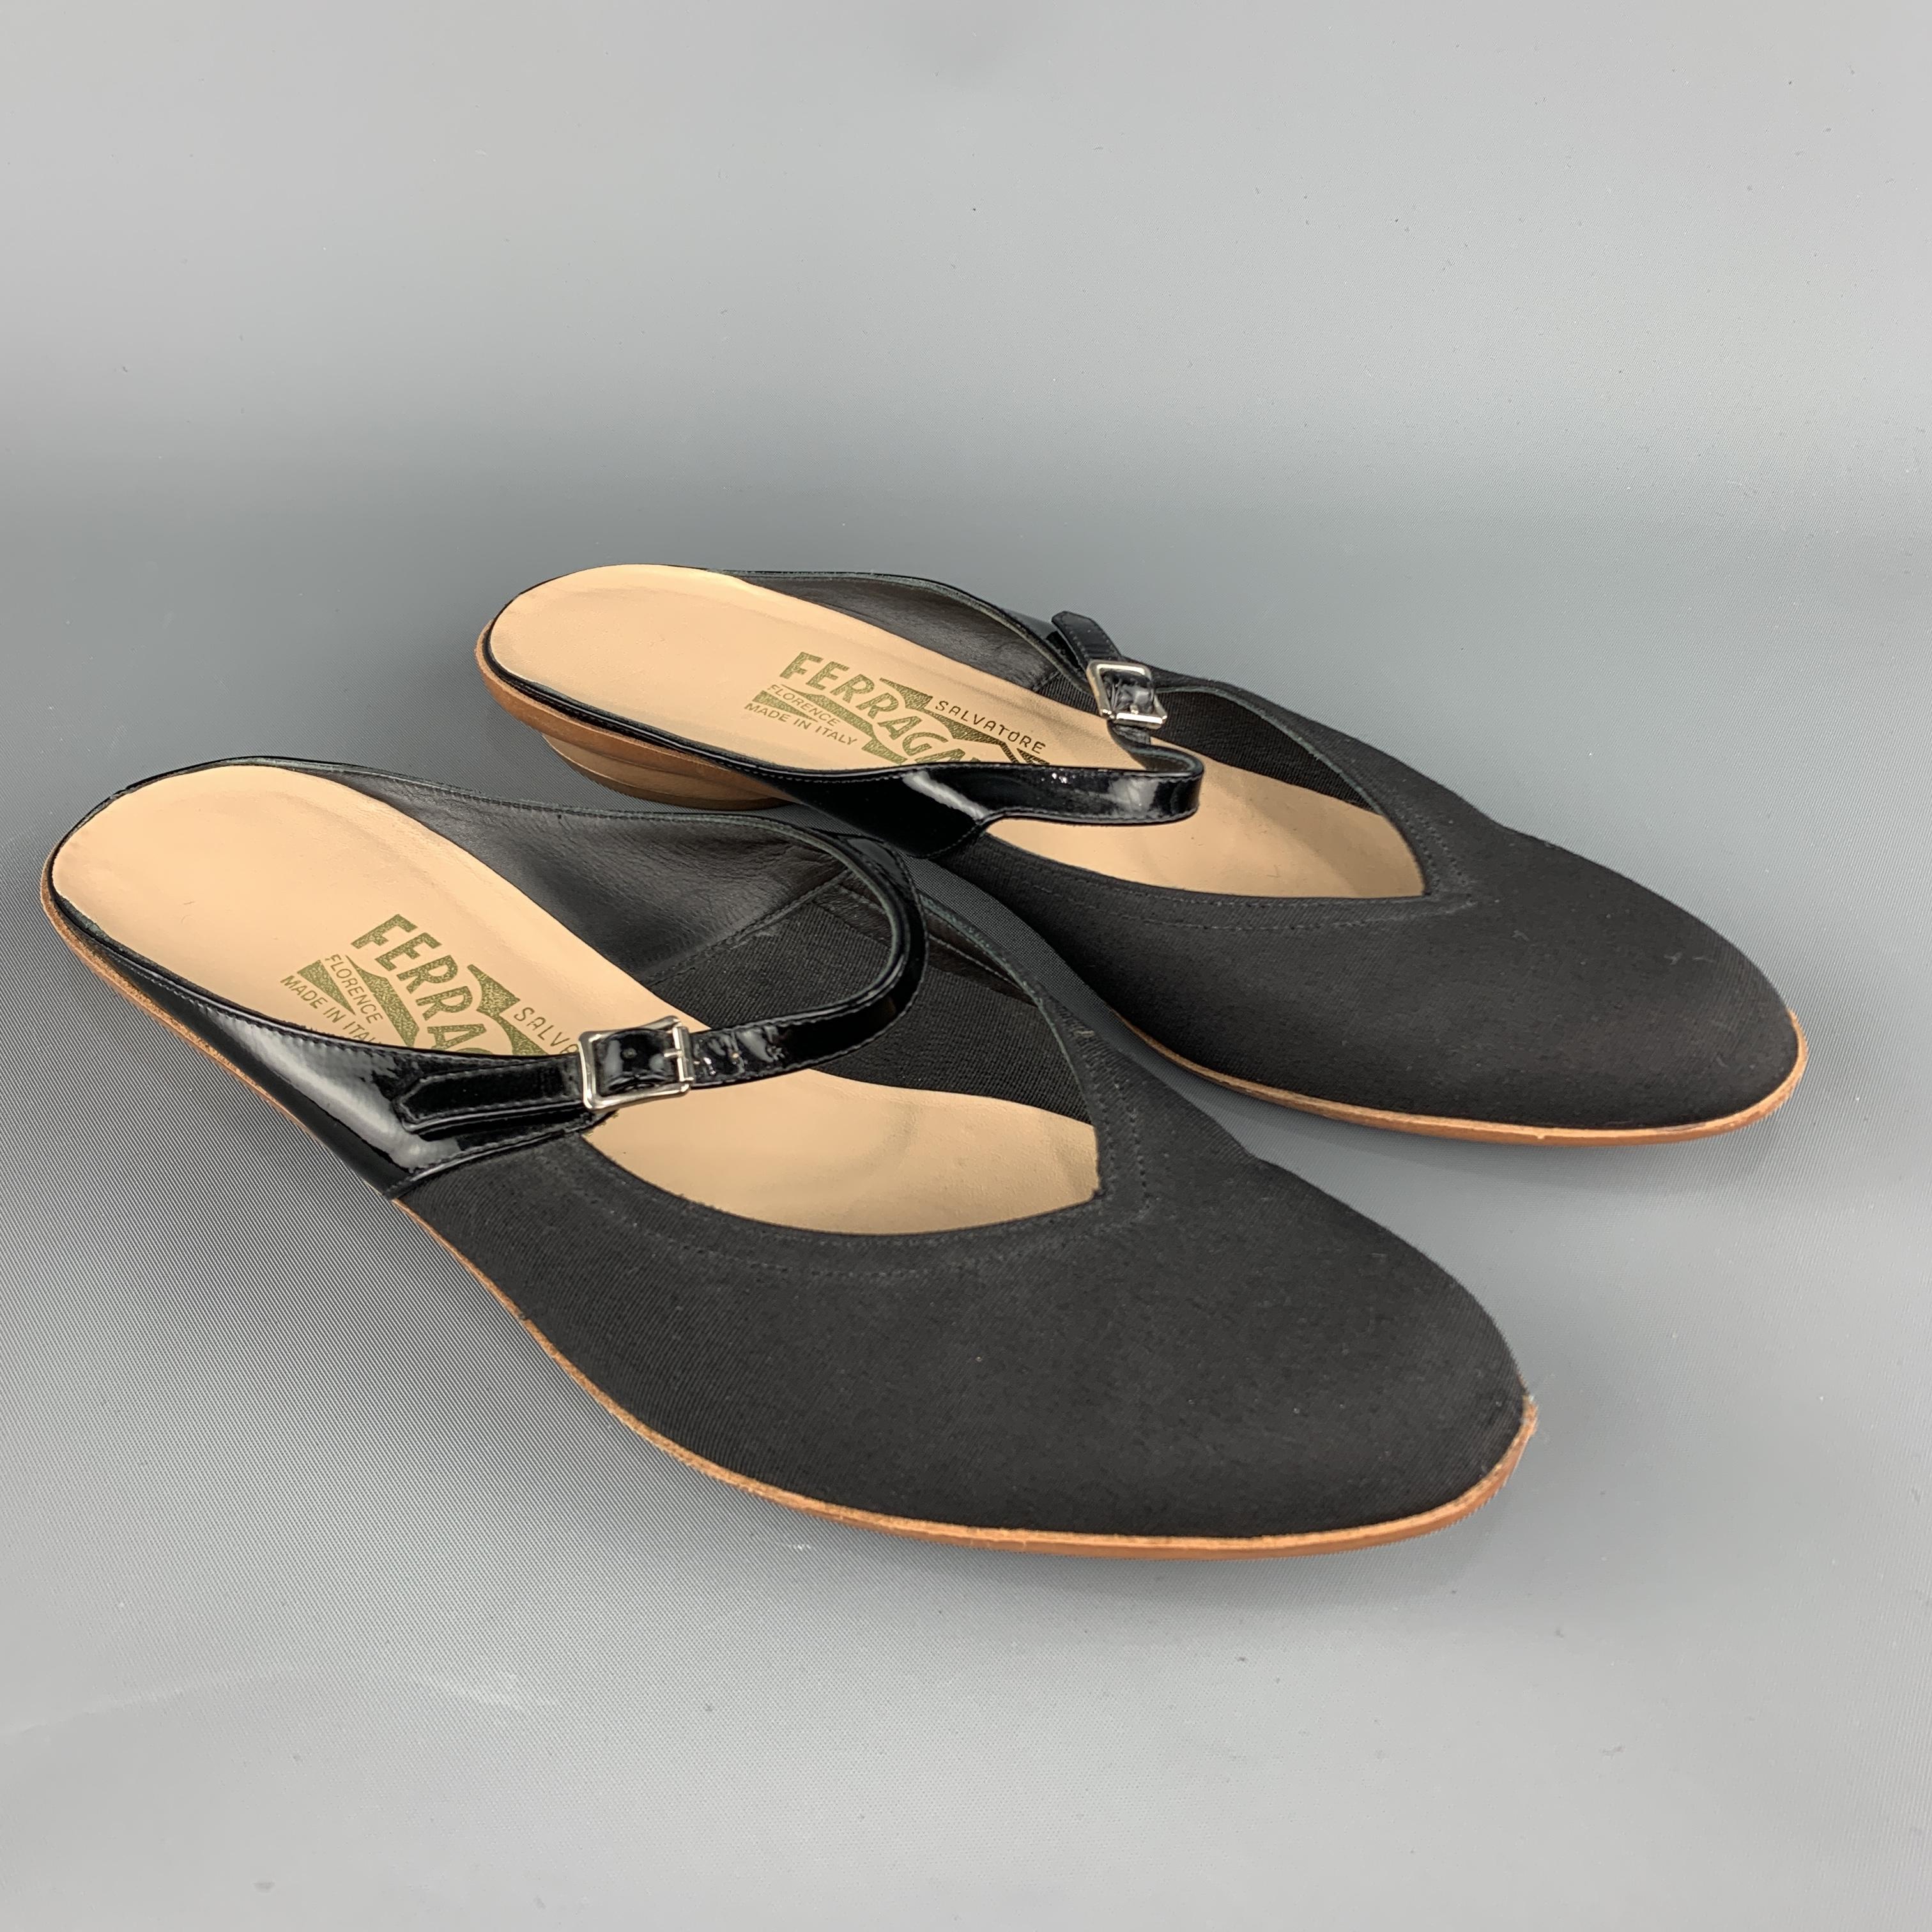 Vintage SALVATORE FERRAGAMO flats come in black faille with a patent Mary Jane strap. Made in Italy.
 
Excellent Pre-Owned Condition.
Marked: 7 1/2